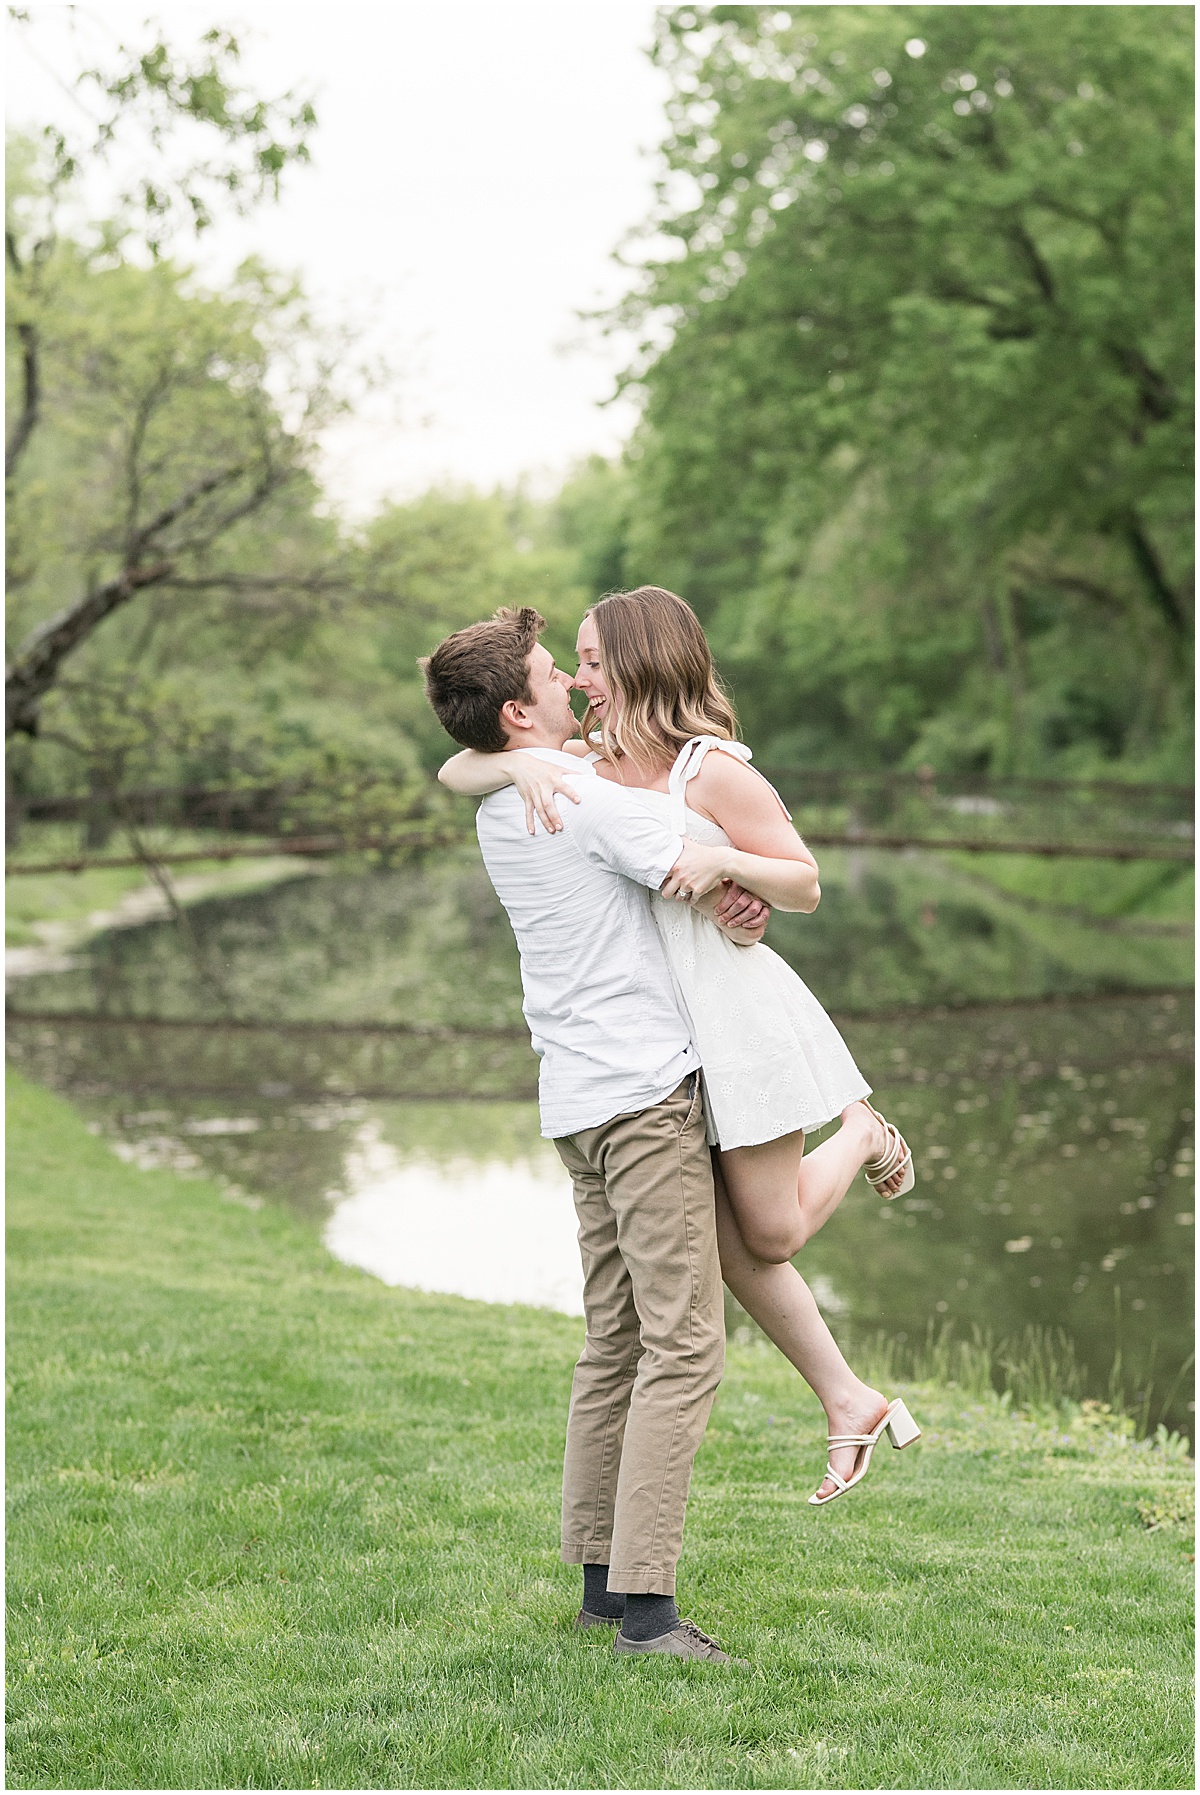 Man lifts fiancee during engagement photos at Holcomb Gardens in Indianapolis.